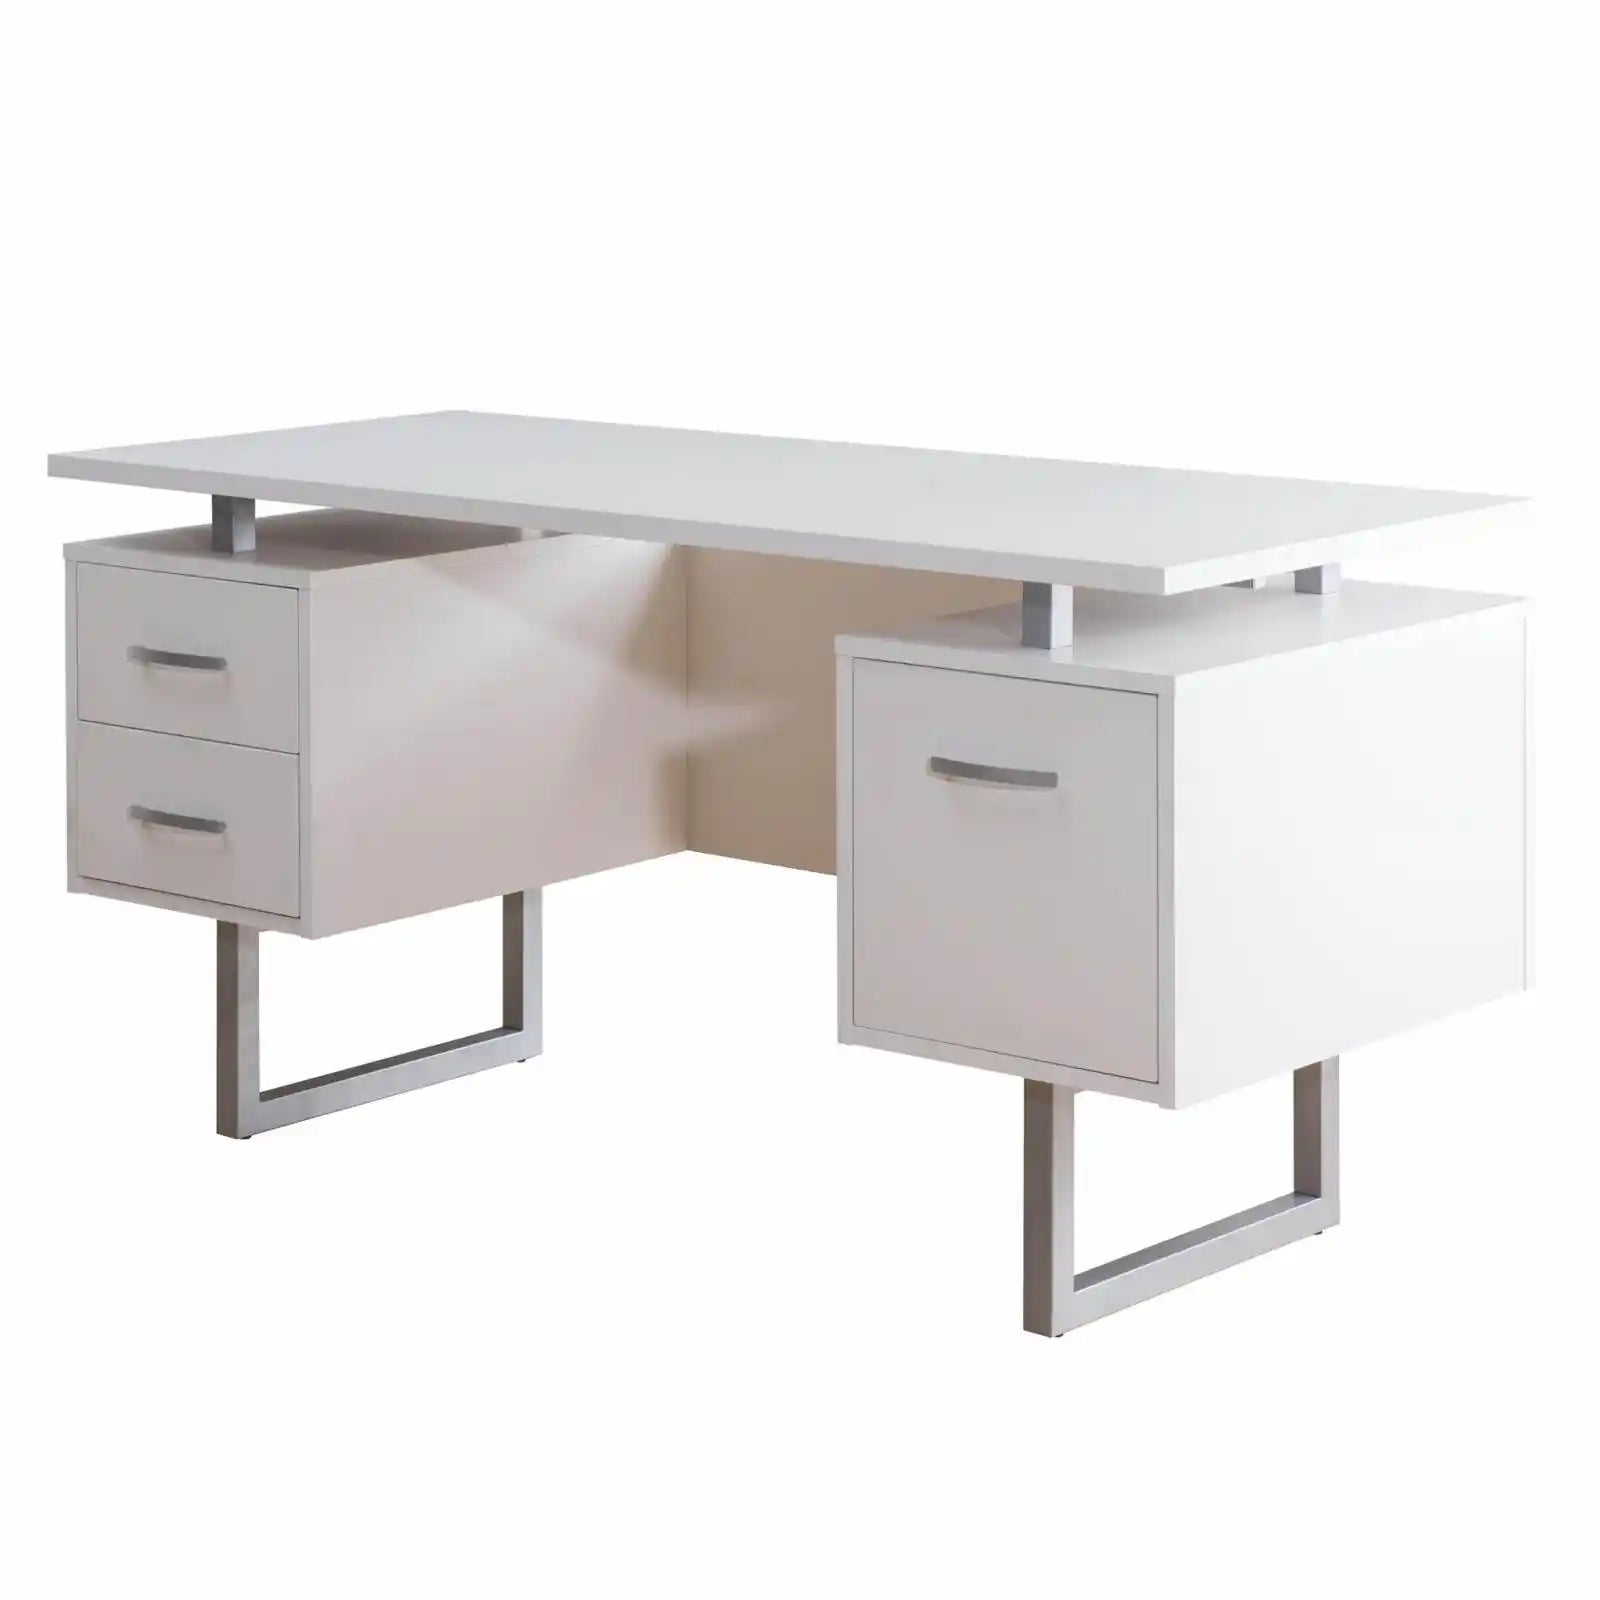 60 Inch White Office Desk with Storage Drawers